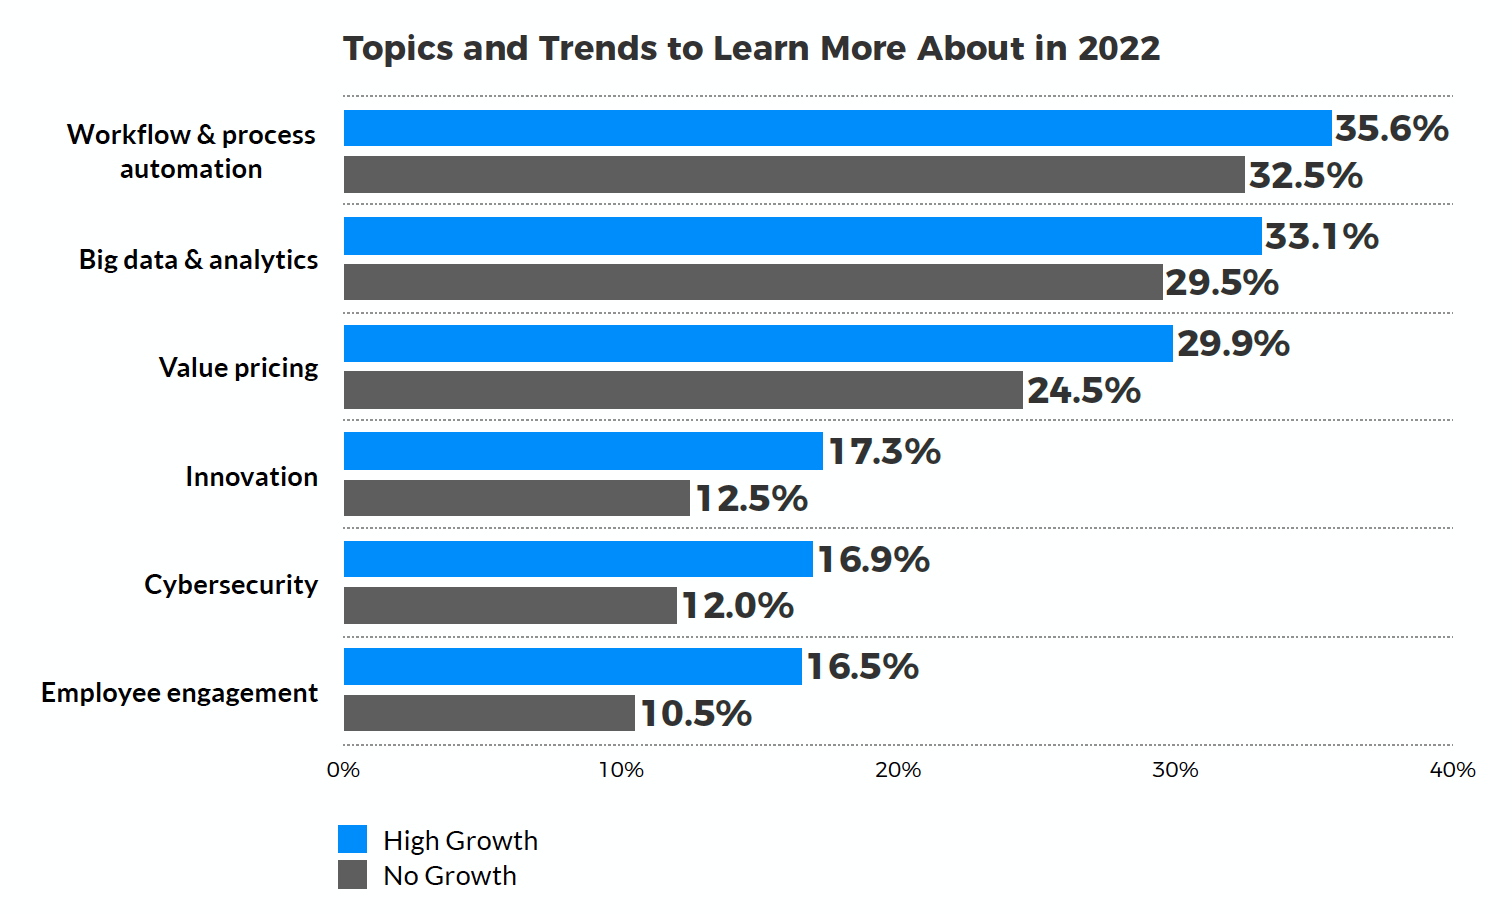 Topics and Trends 2022 - Professional Services Research